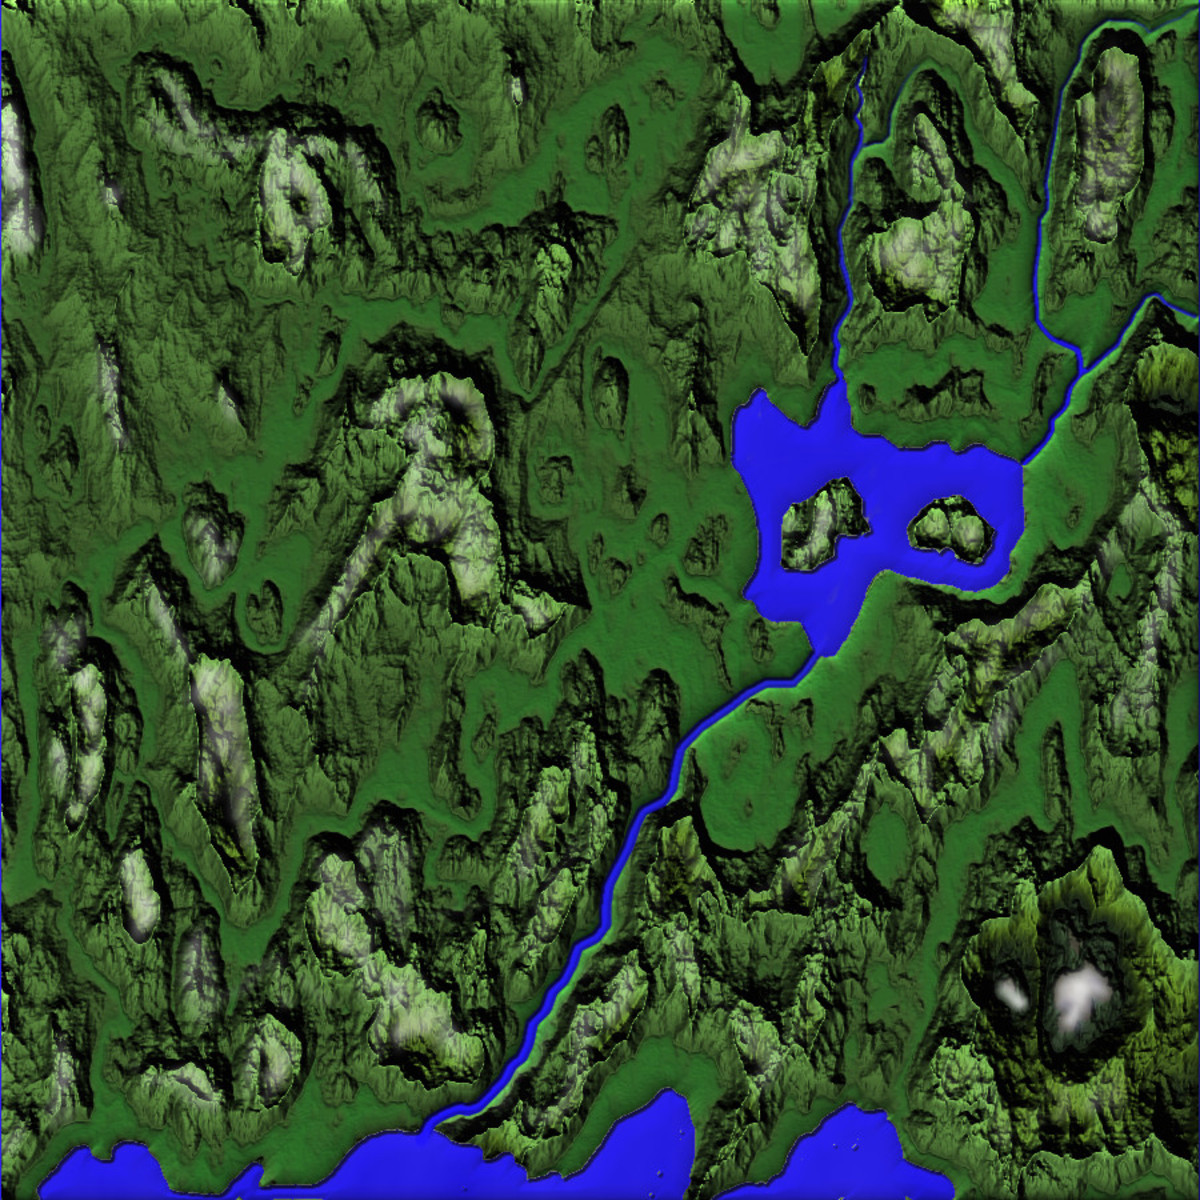 Creating Realistic River on Fantasy Maps in GIMP 2.8 (2.10.12)